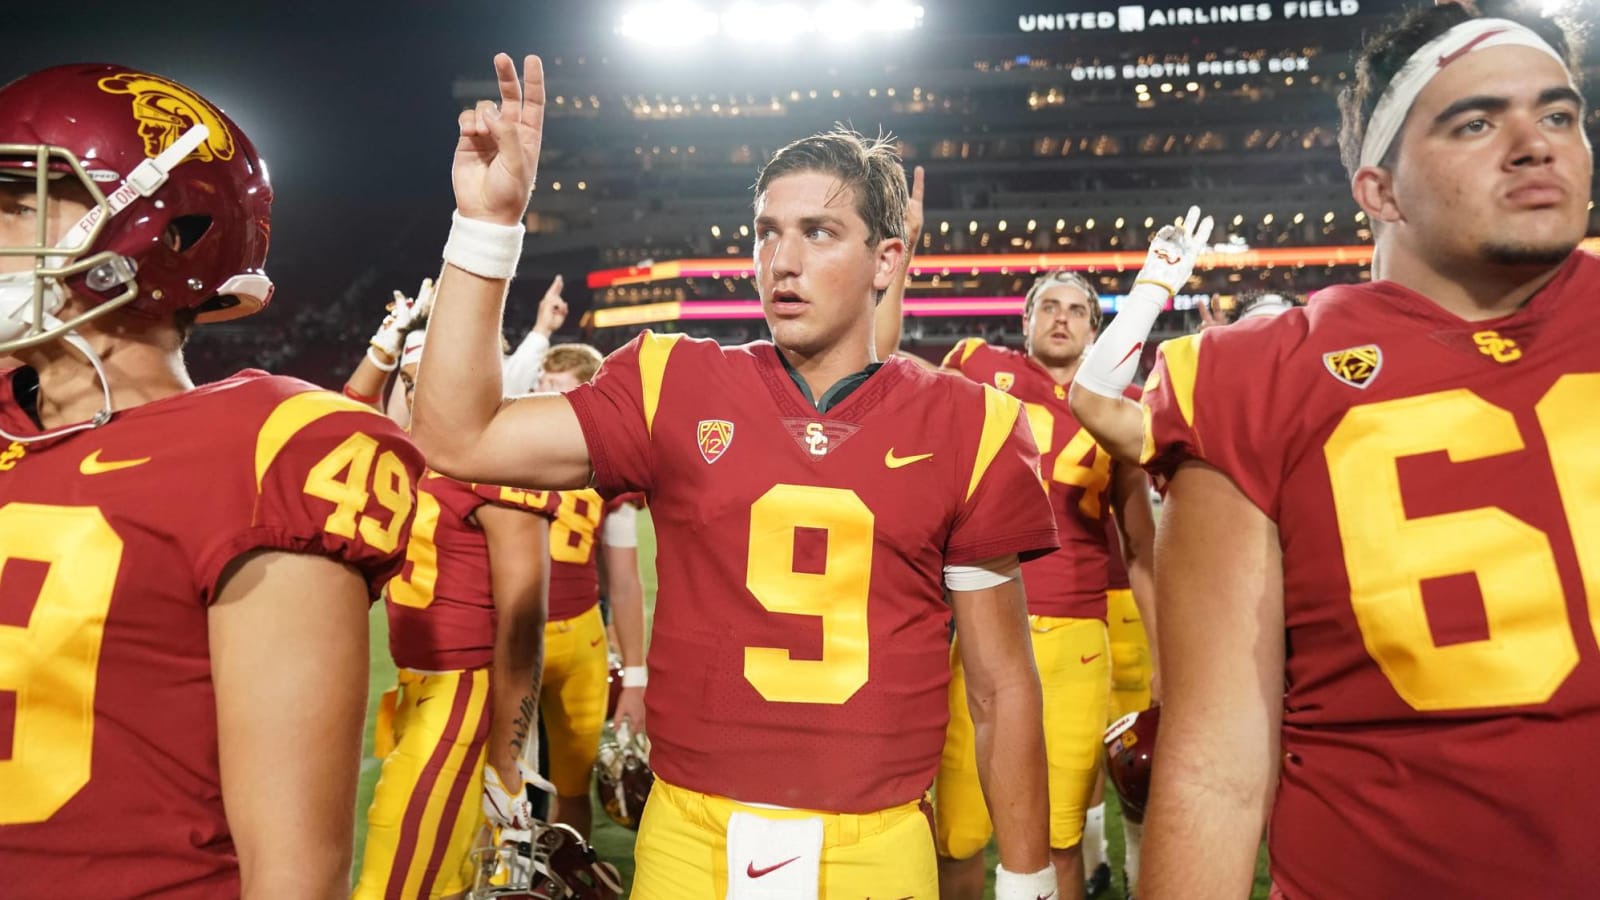 USC may have found a QB, but it still faces major hurdles